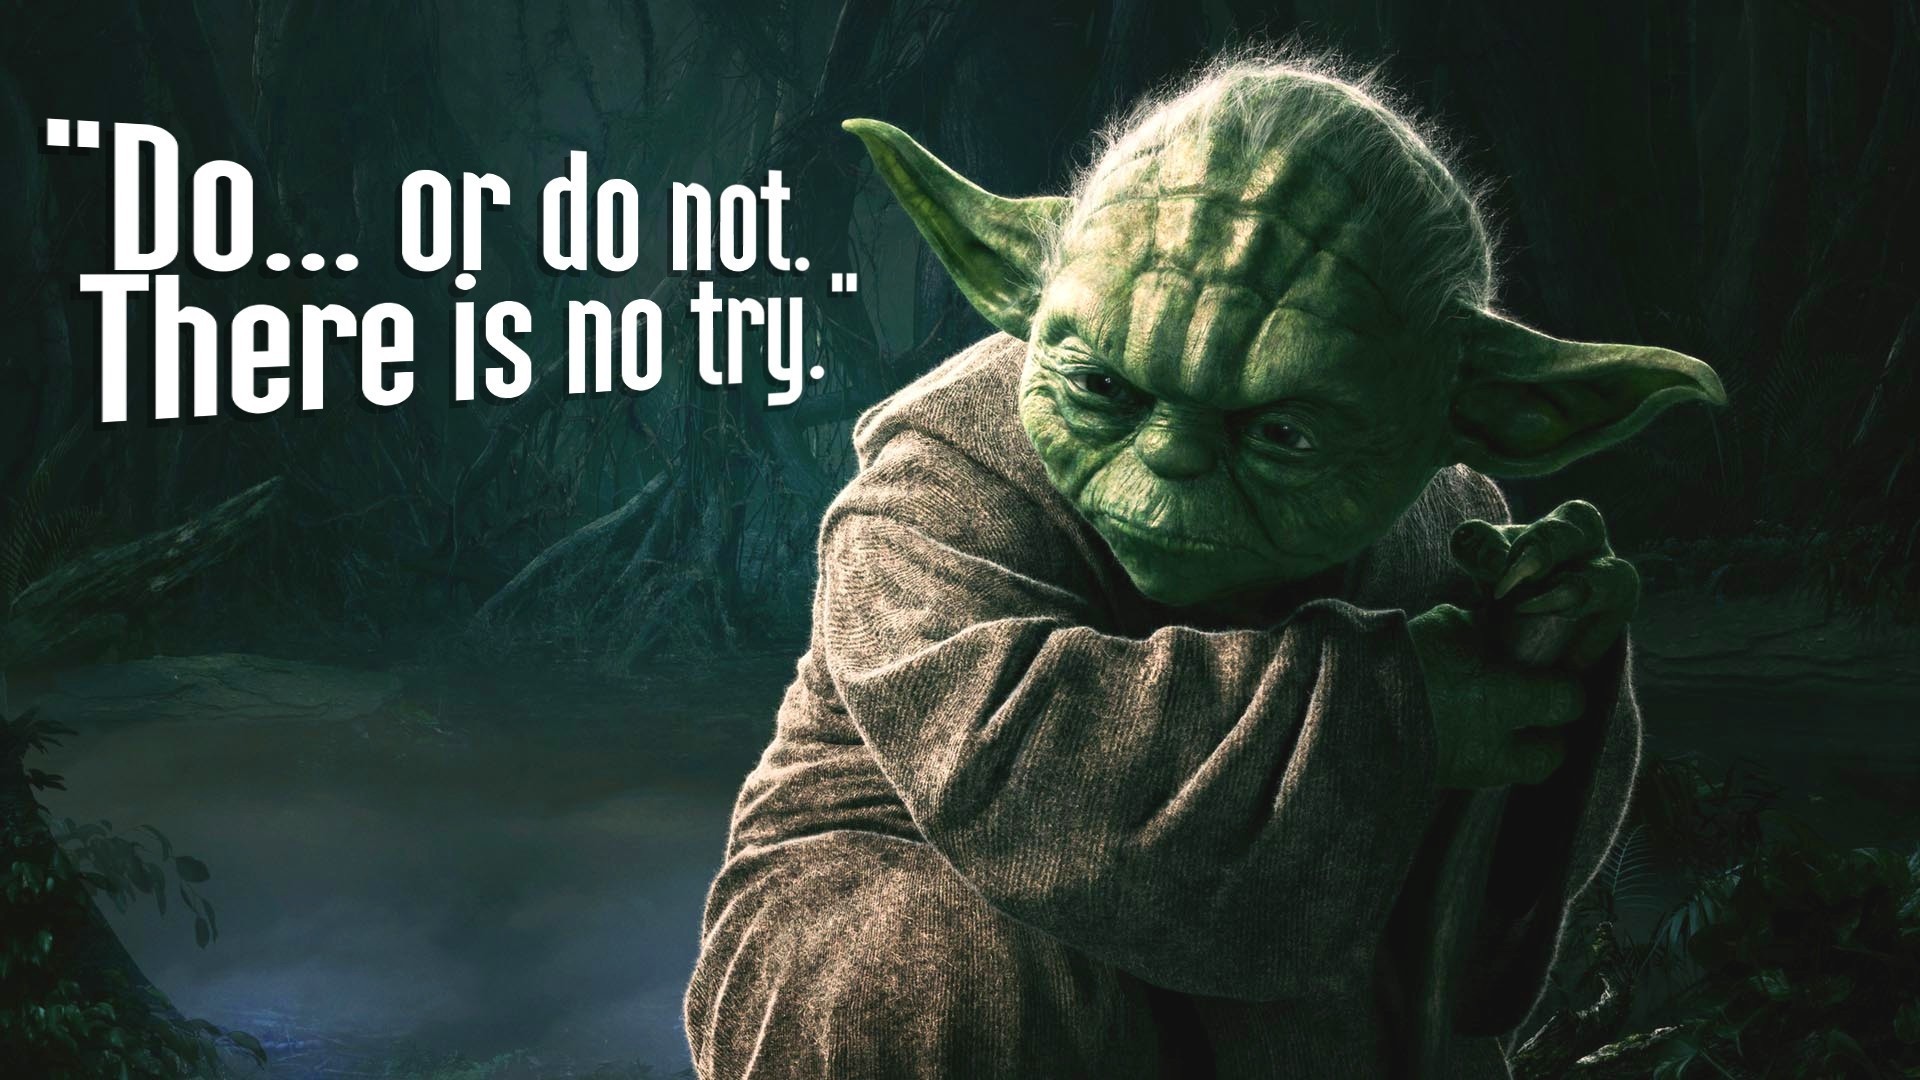 General 1920x1080 movies Star Wars Yoda quote Jedi typography Dagobah science fiction Star Wars Heroes green skin